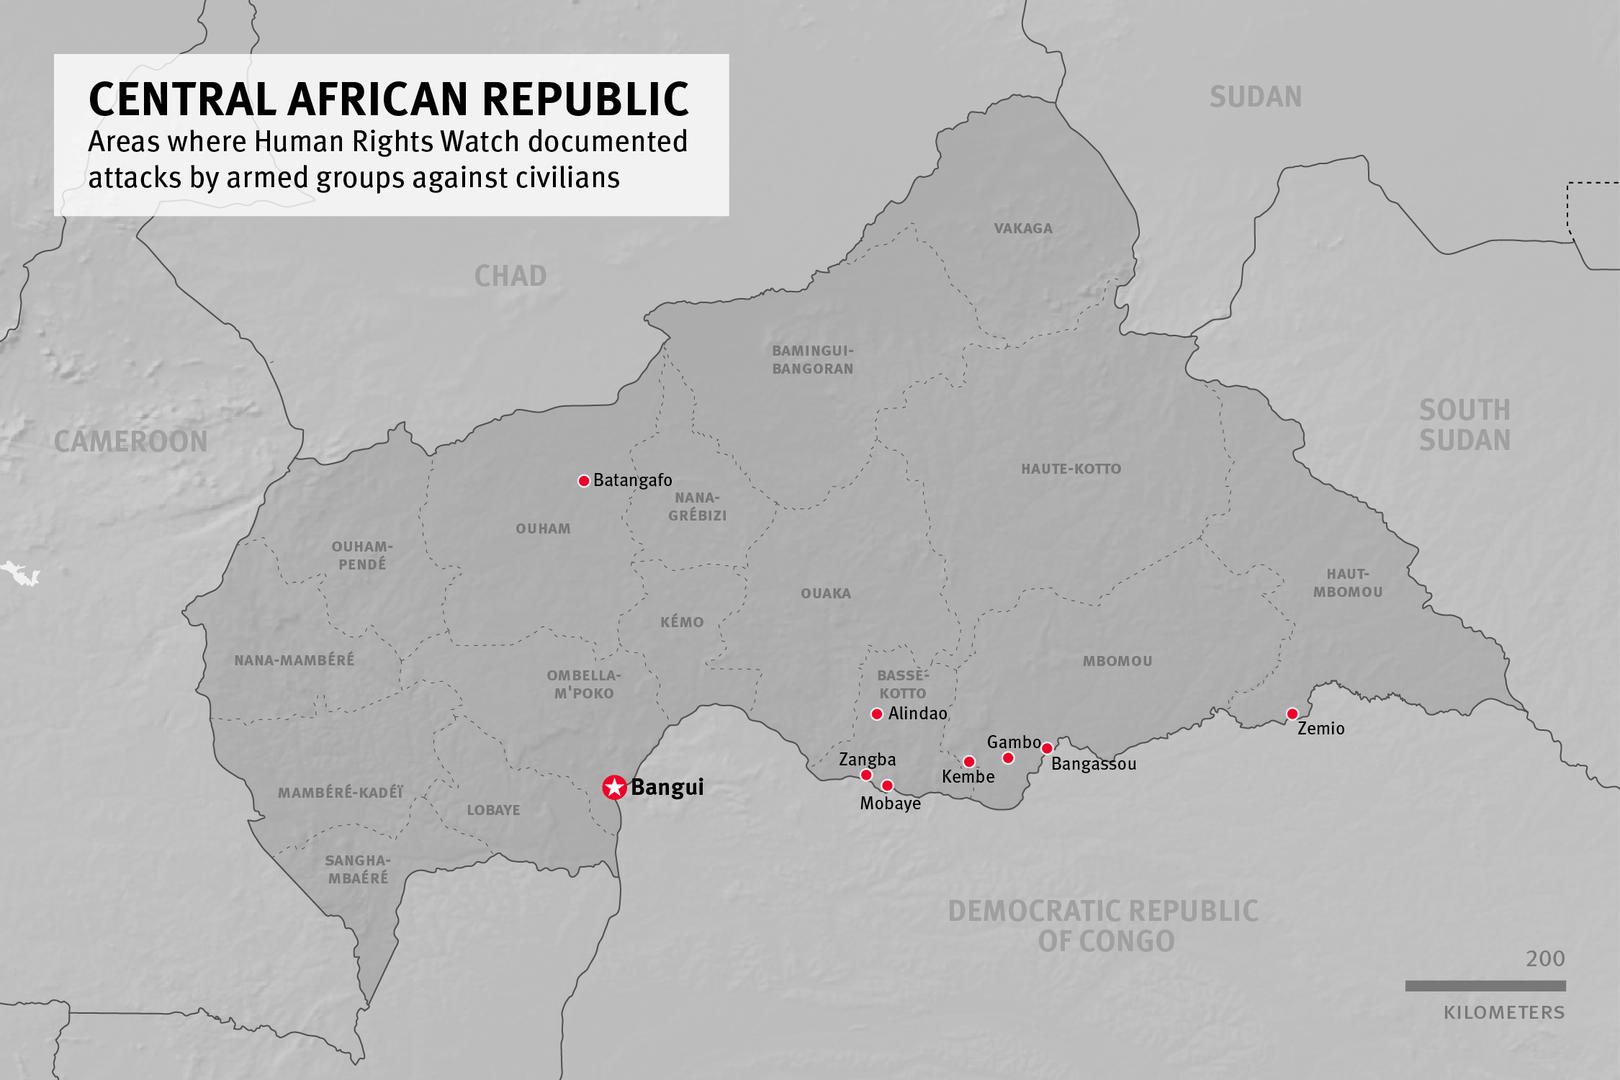 Central African Republic: Areas where Human Rights Watch documented attacks by armed groups against civilians, May-October 2017.